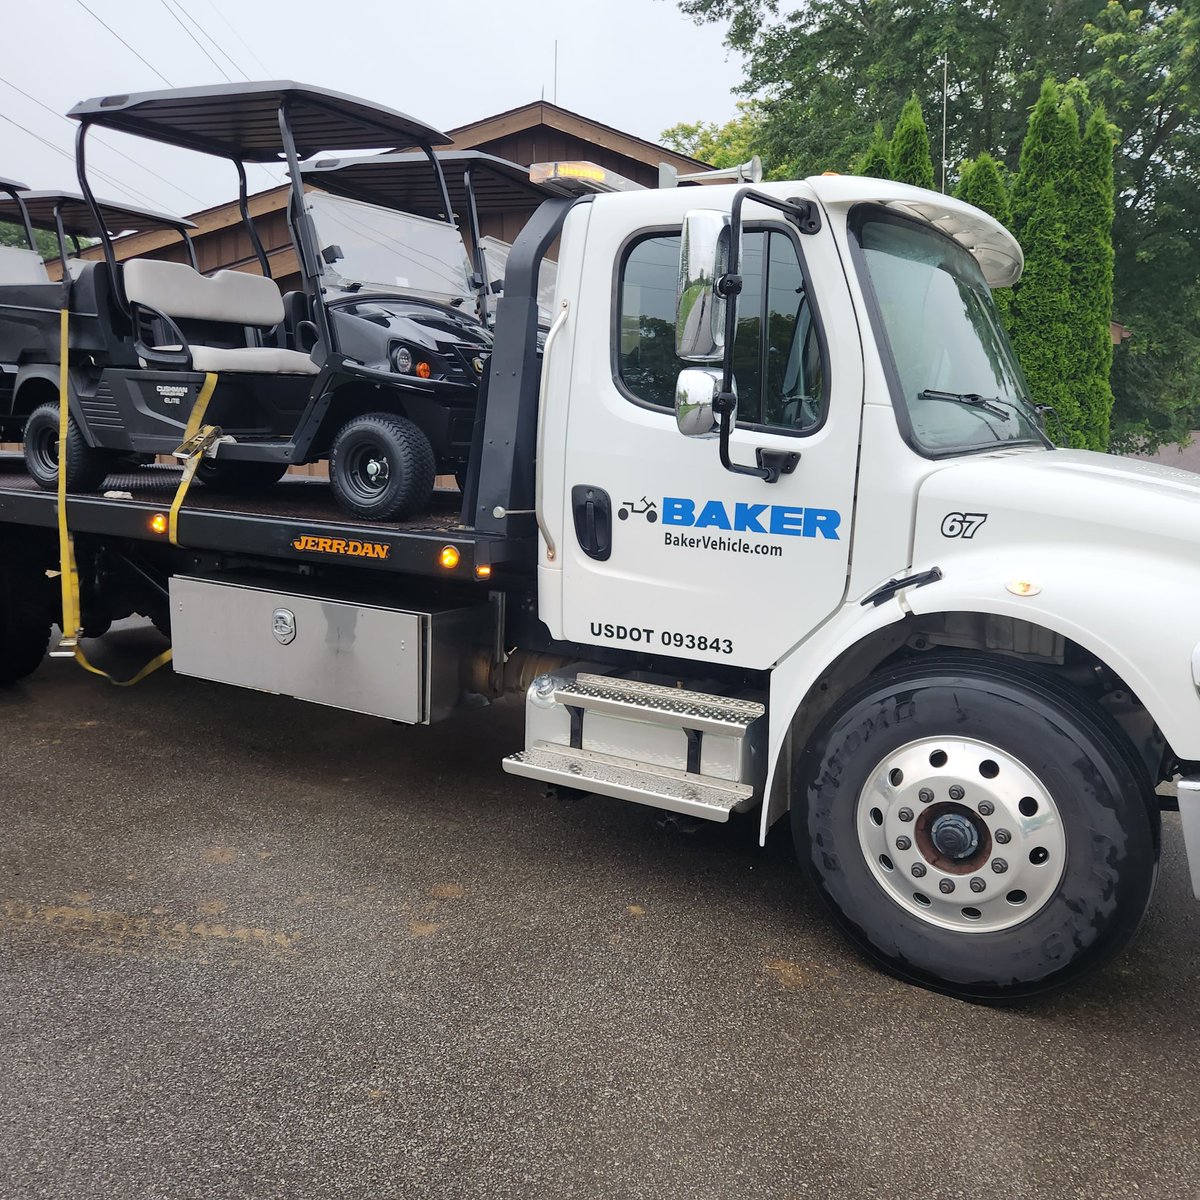 Early morning delivery, new service carts #golfcourse #equipment #equipmentmanagrment #bakervehicle